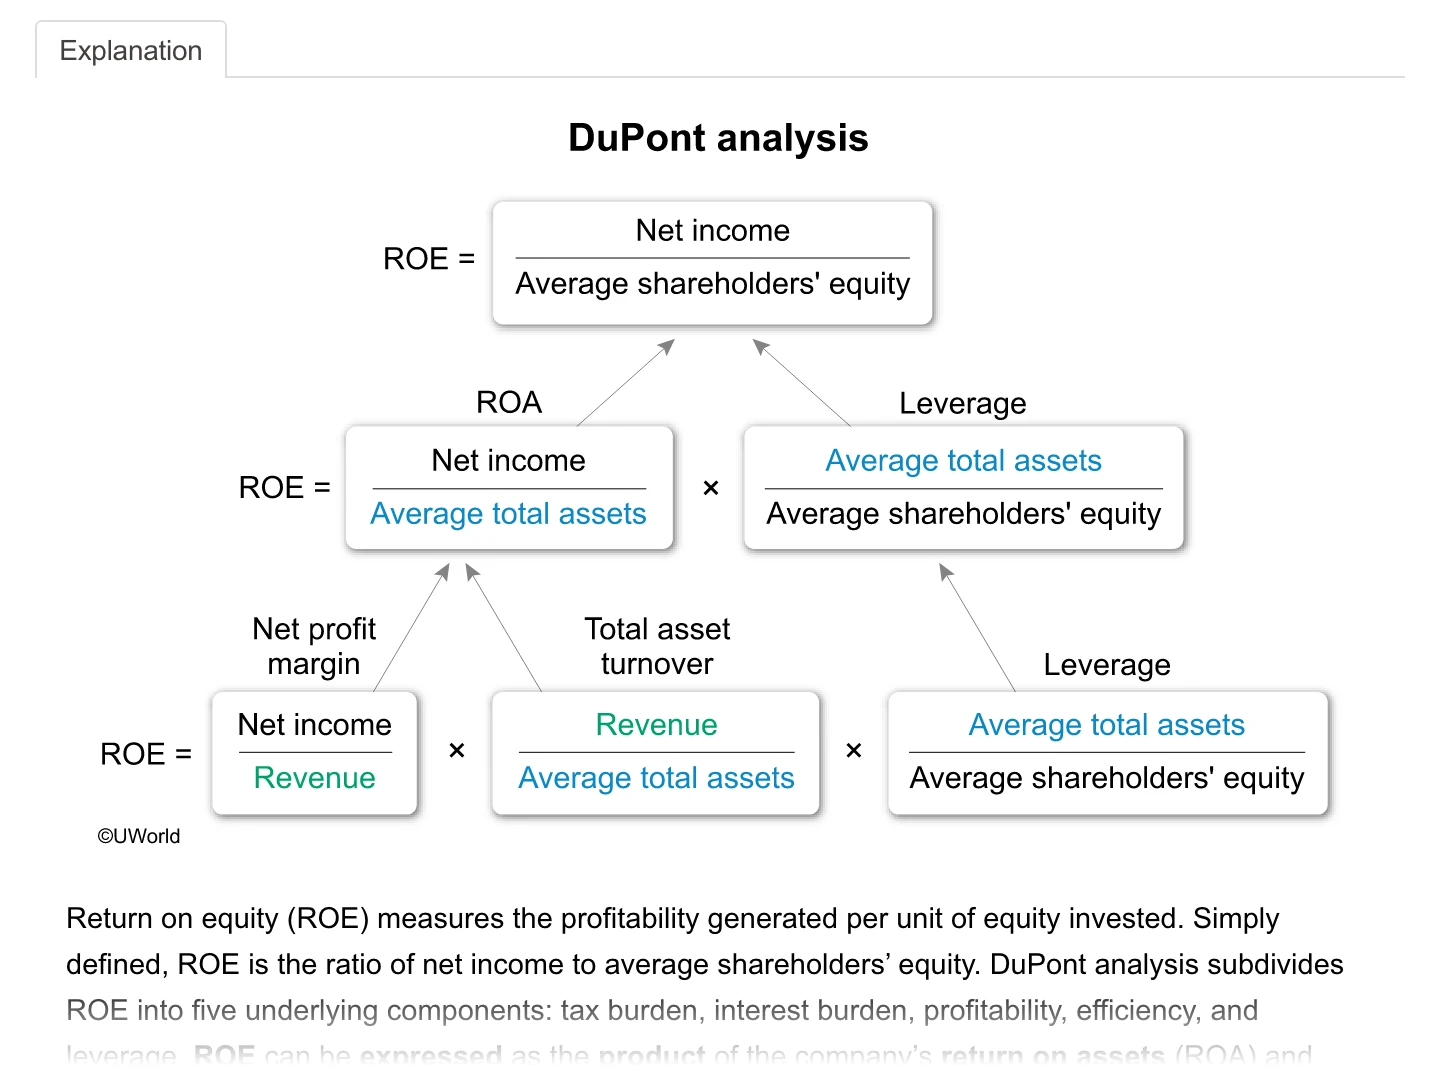 The image depicts Dupont analysis